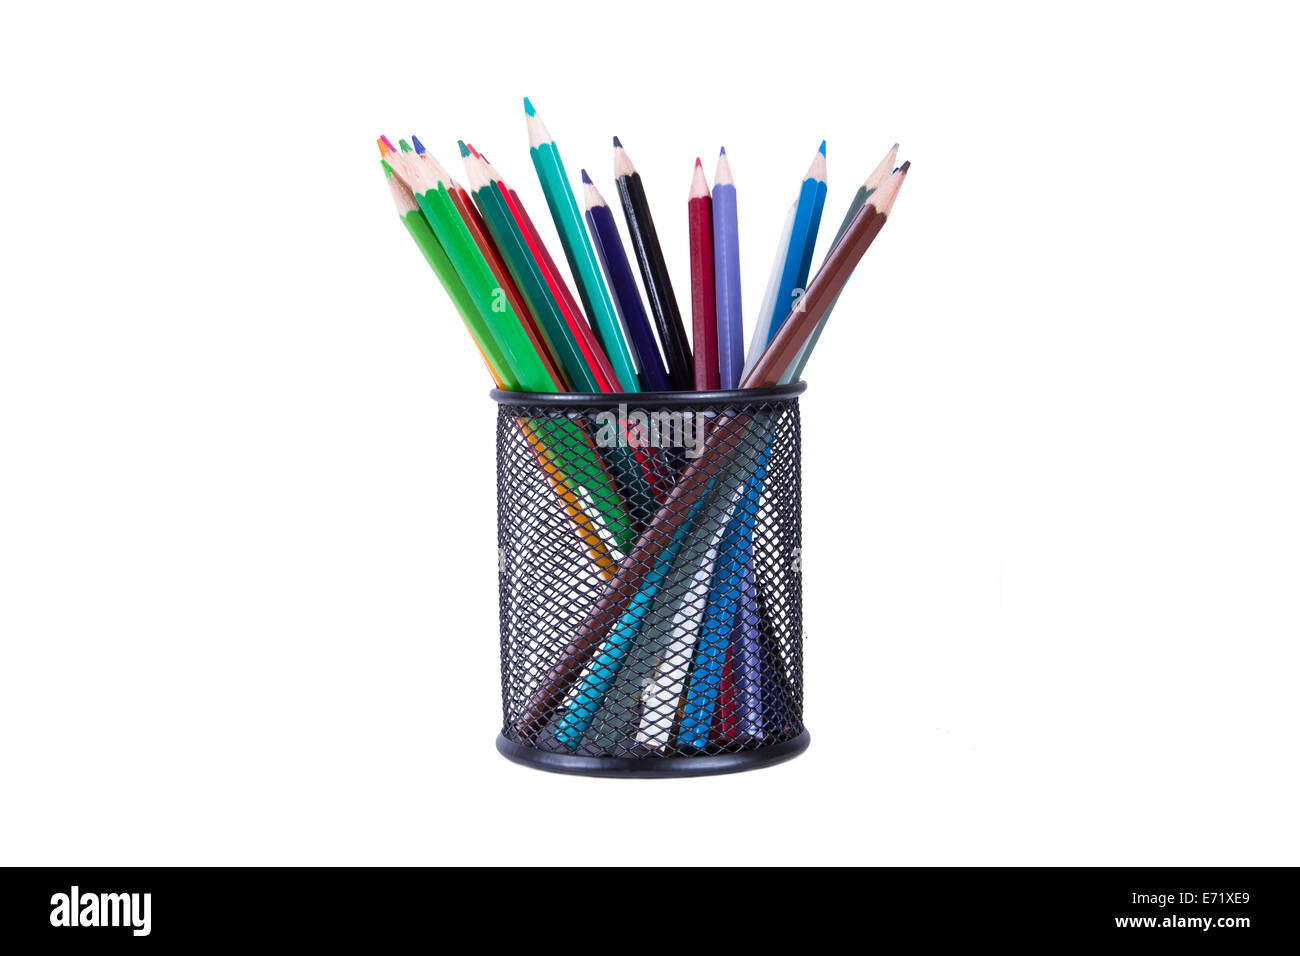 https://c8.alamy.com/comp/E71XE9/close-up-view-of-colored-pencils-in-pencil-case-box-isolated-on-white-E71XE9.jpg